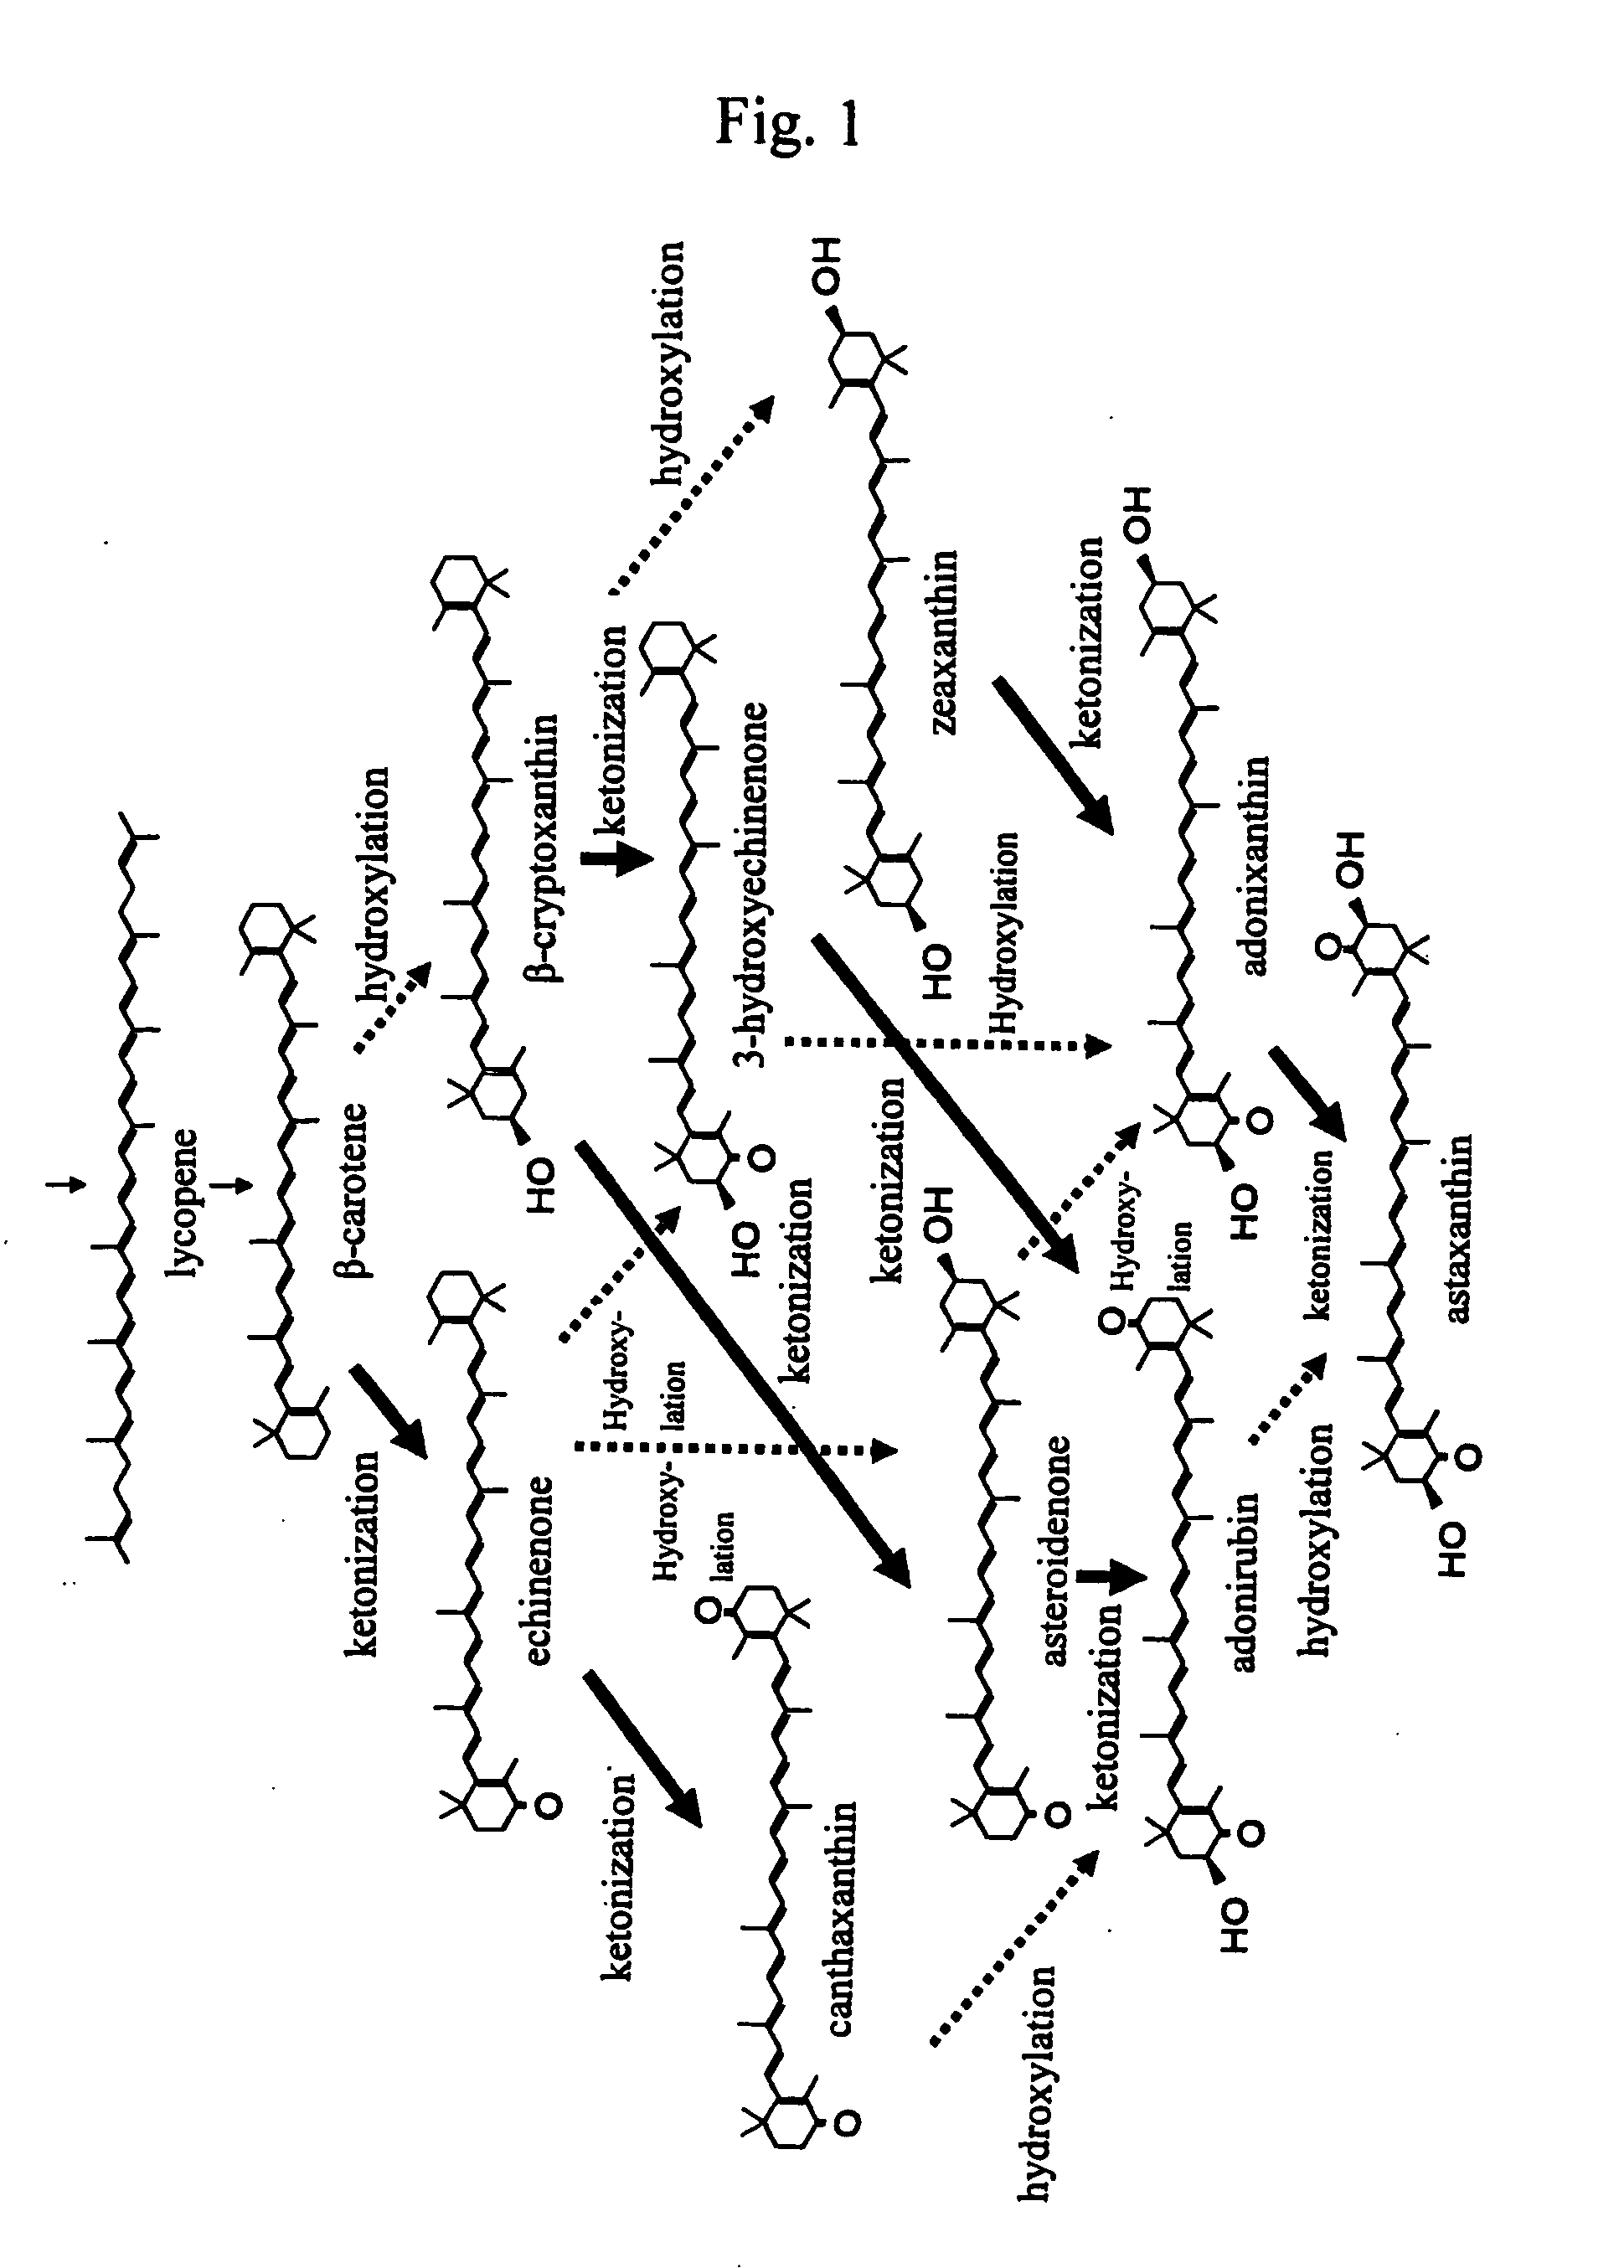 Process for producing carotenoid compound